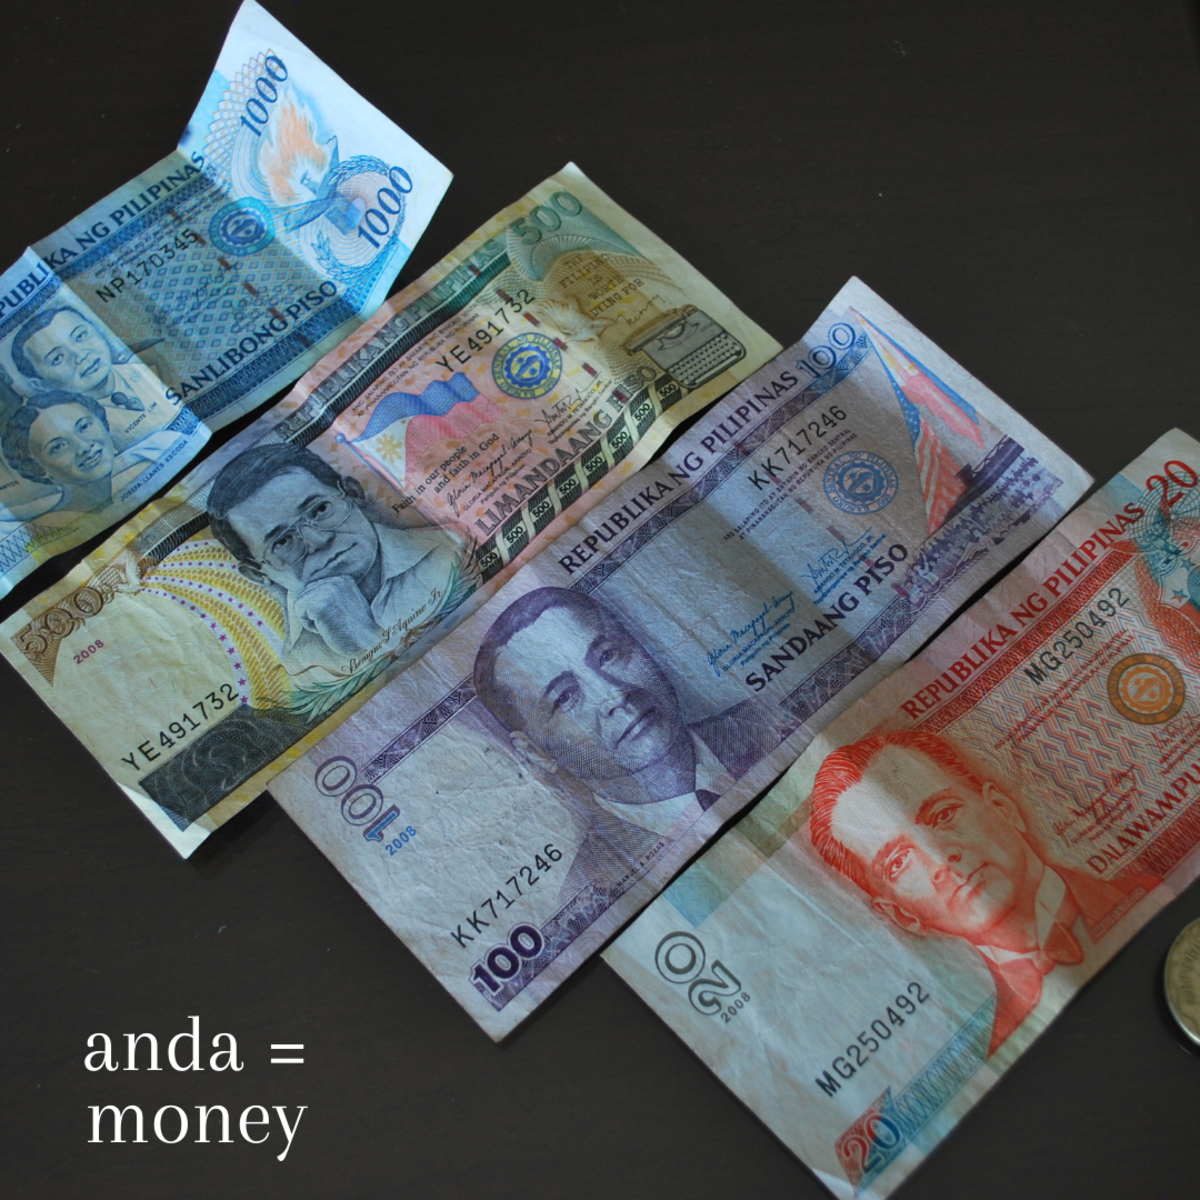 If you're looking for a cooler way to refer to money, then consider the Tagalog slang word known as "anda."